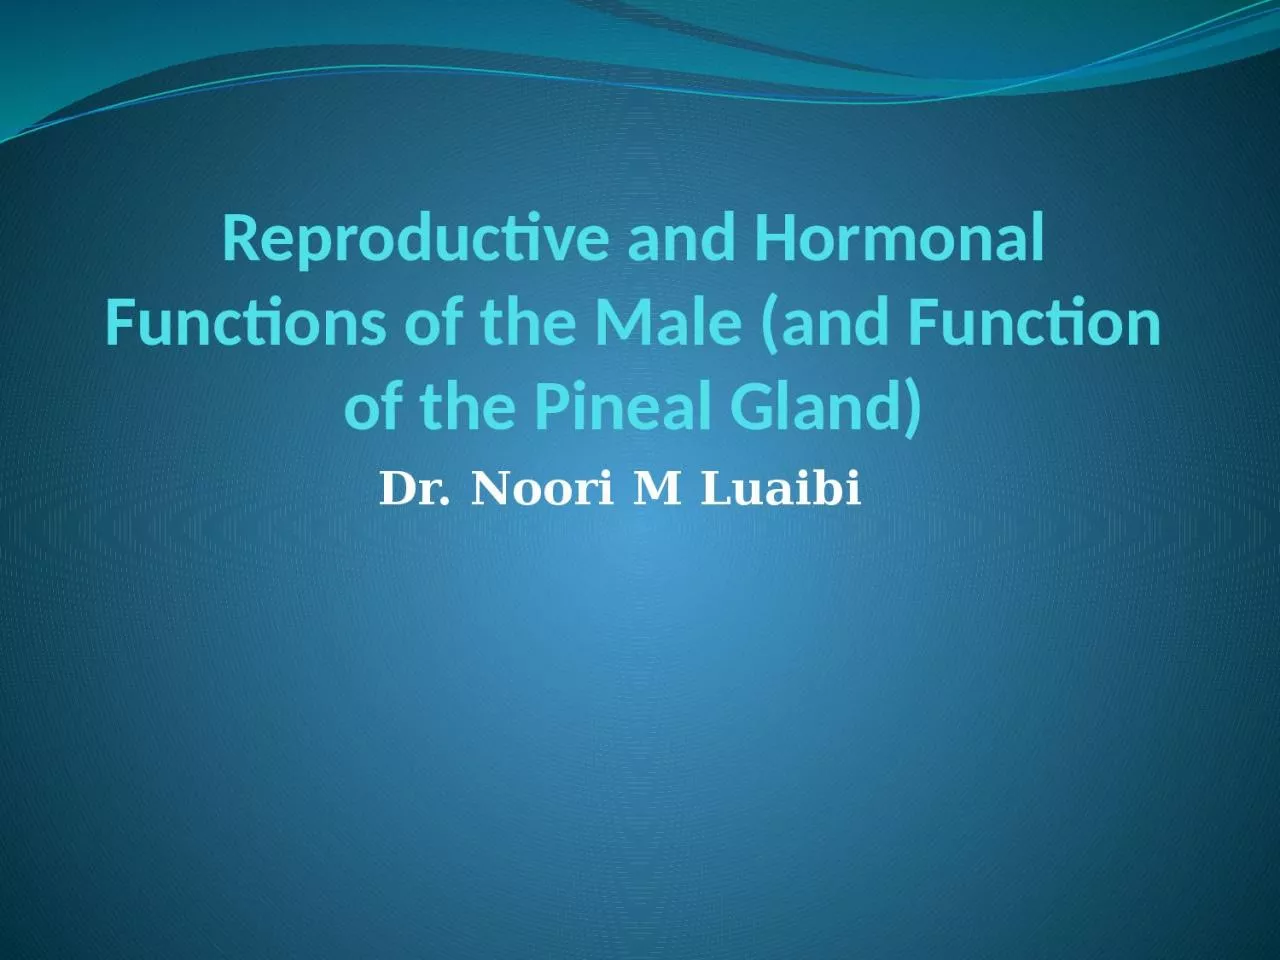 Reproductive and Hormonal Functions of the Male (and Function of the Pineal Gland